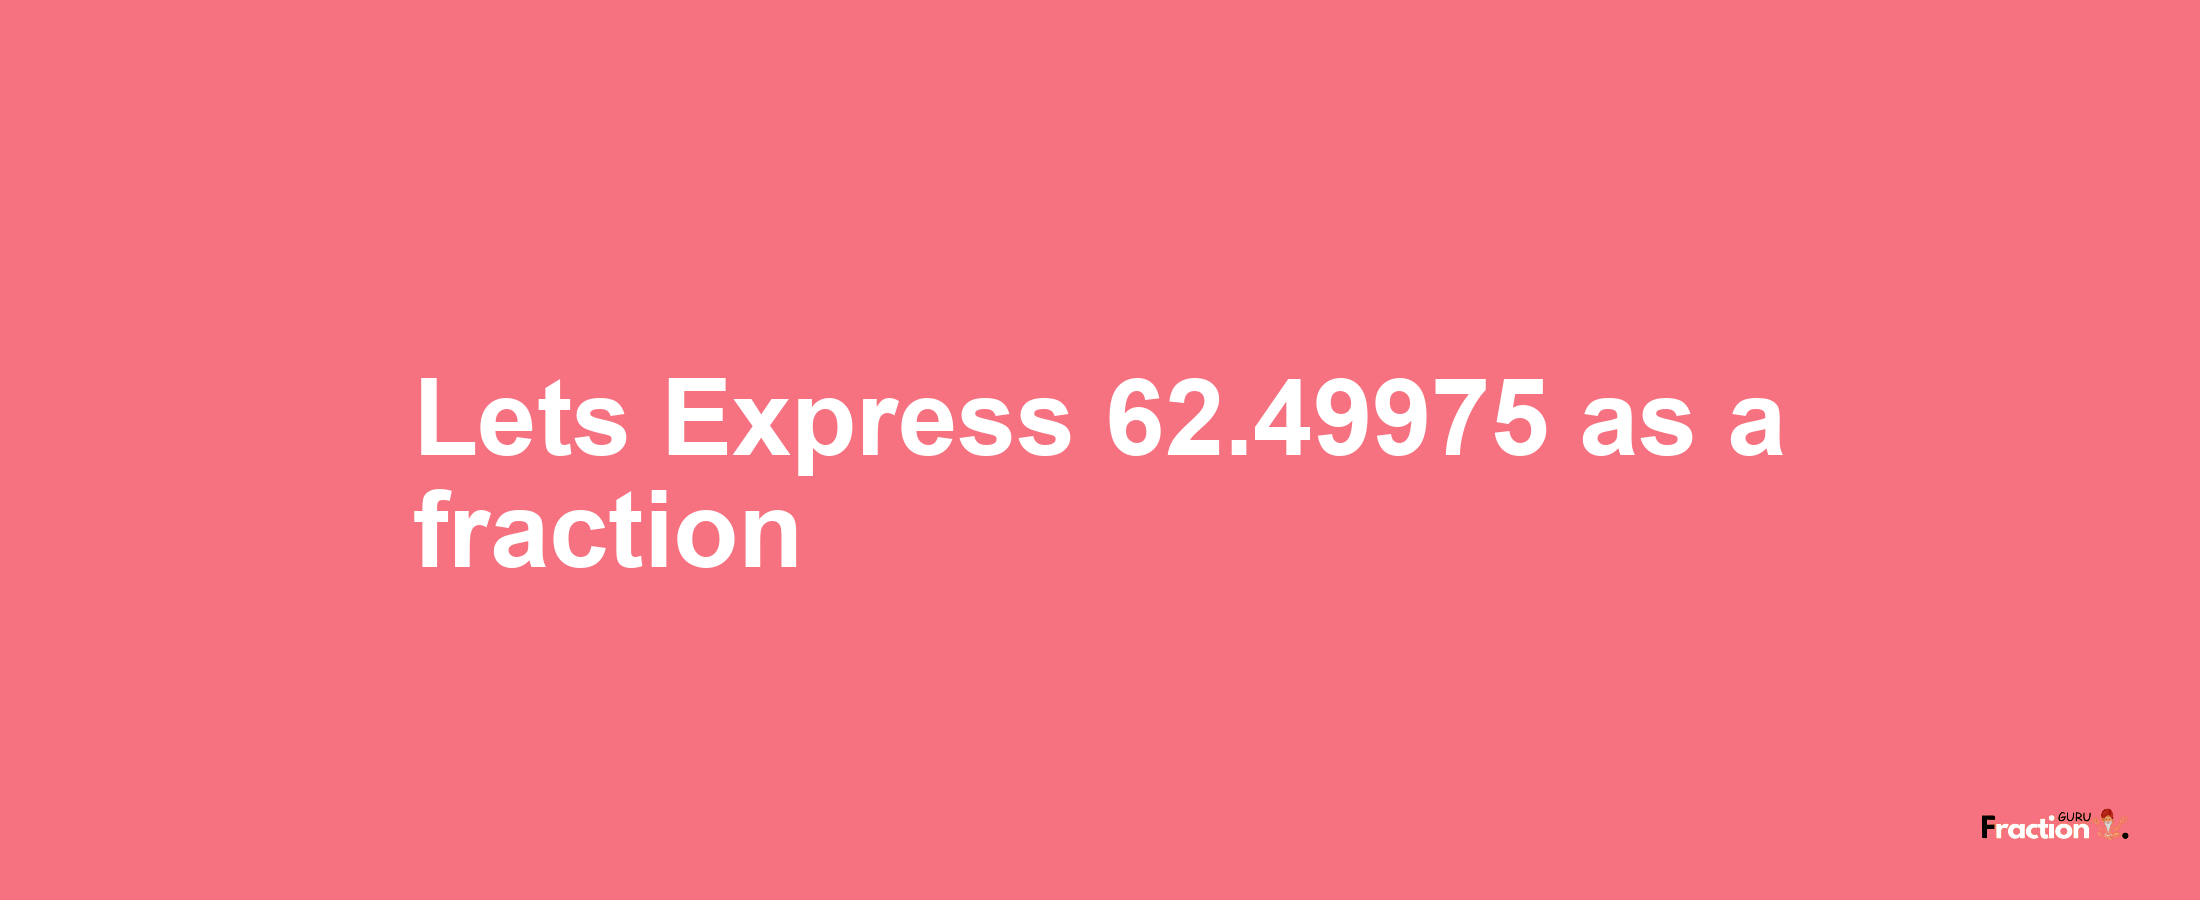 Lets Express 62.49975 as afraction